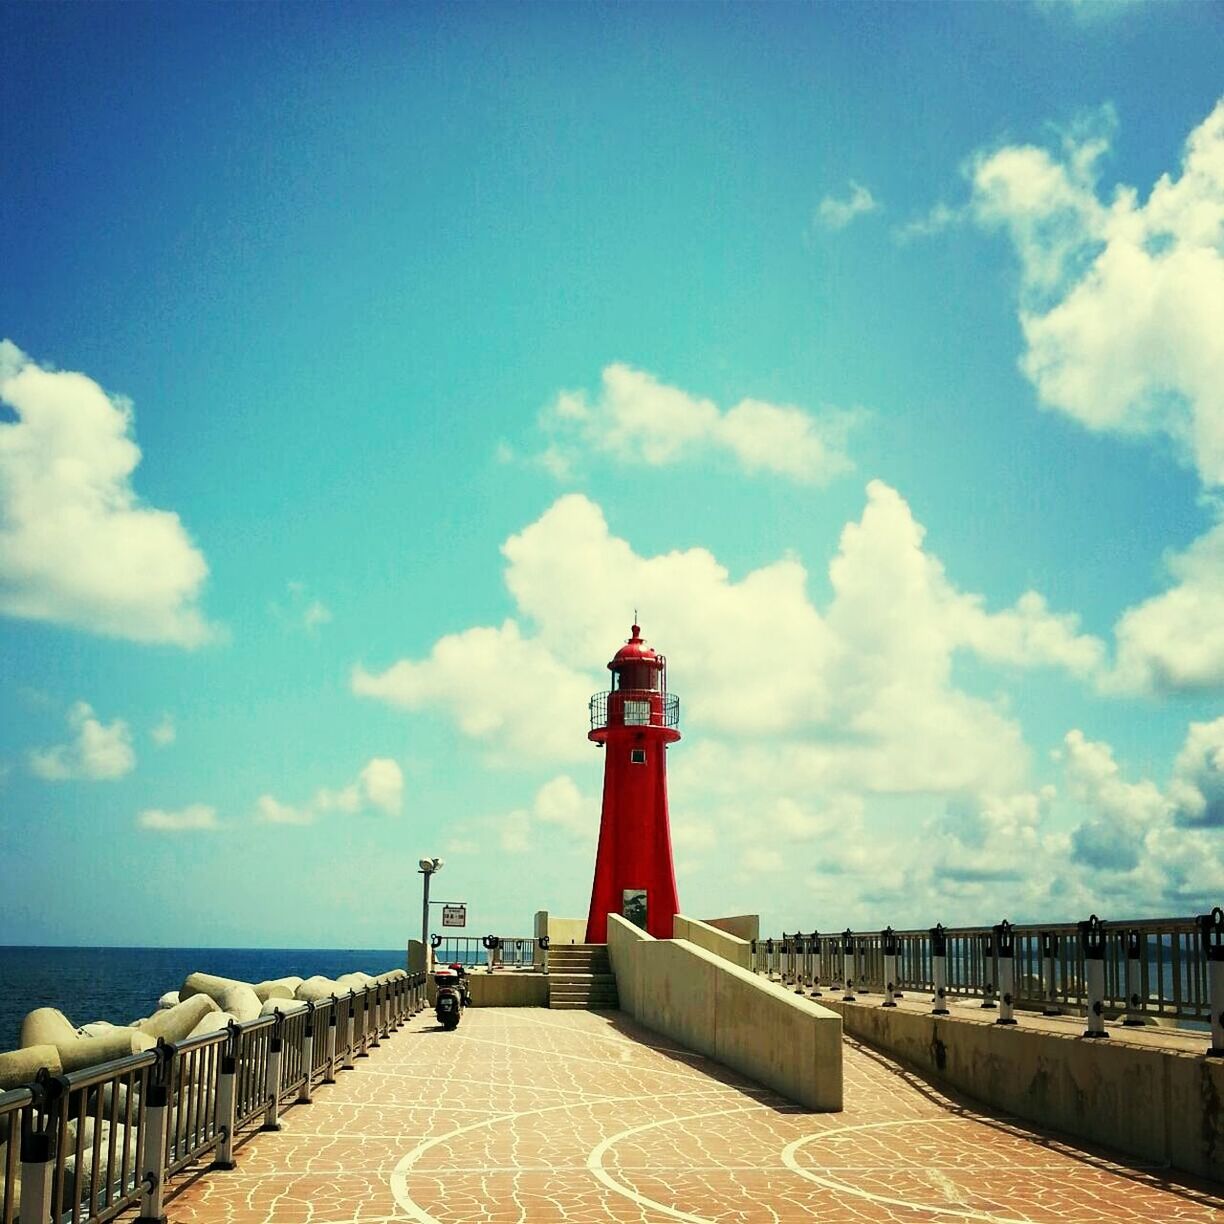 sea, sky, lighthouse, horizon over water, water, built structure, guidance, railing, protection, architecture, safety, cloud - sky, security, direction, beach, red, tranquility, cloud, pier, tranquil scene